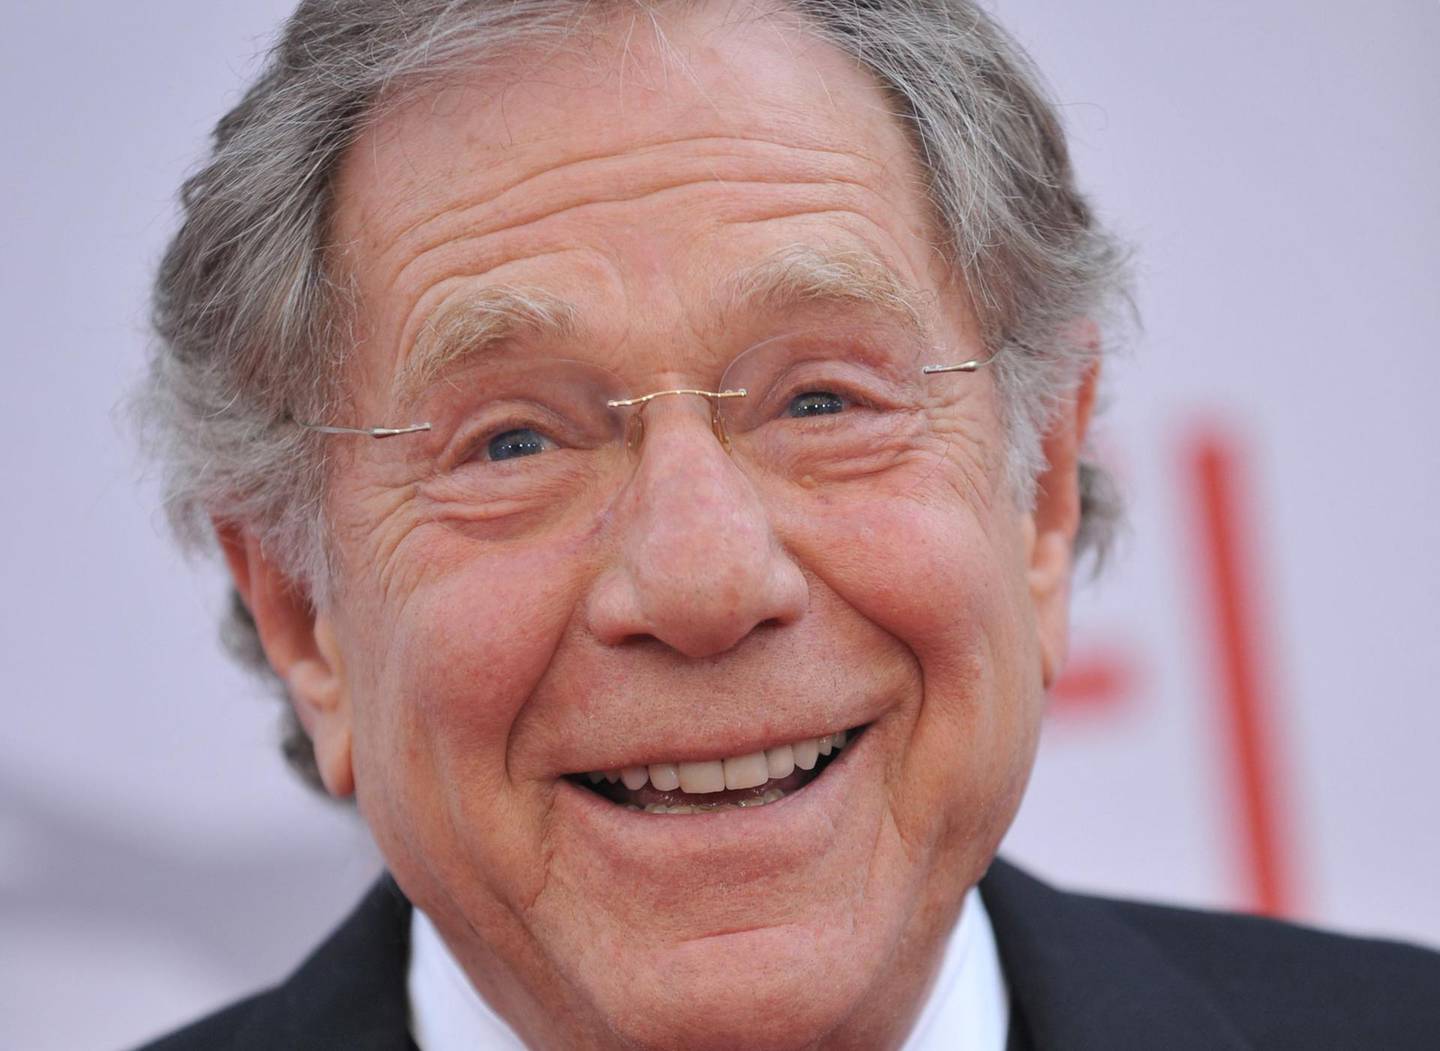 This photo taken June 10, 2010 shows actor George Segal at AFI Life Achievement award to Mike Nichols held at the Sony Studios in Los Angeles. US actor George Segal died on March 23, 2021, his wife Sonia, confirmed in a statement. He was 87. "The family is devastated to announce that this morning George Segal passed away due to complications from bypass surgery," said the statement. / AFP / Chris DELMAS
